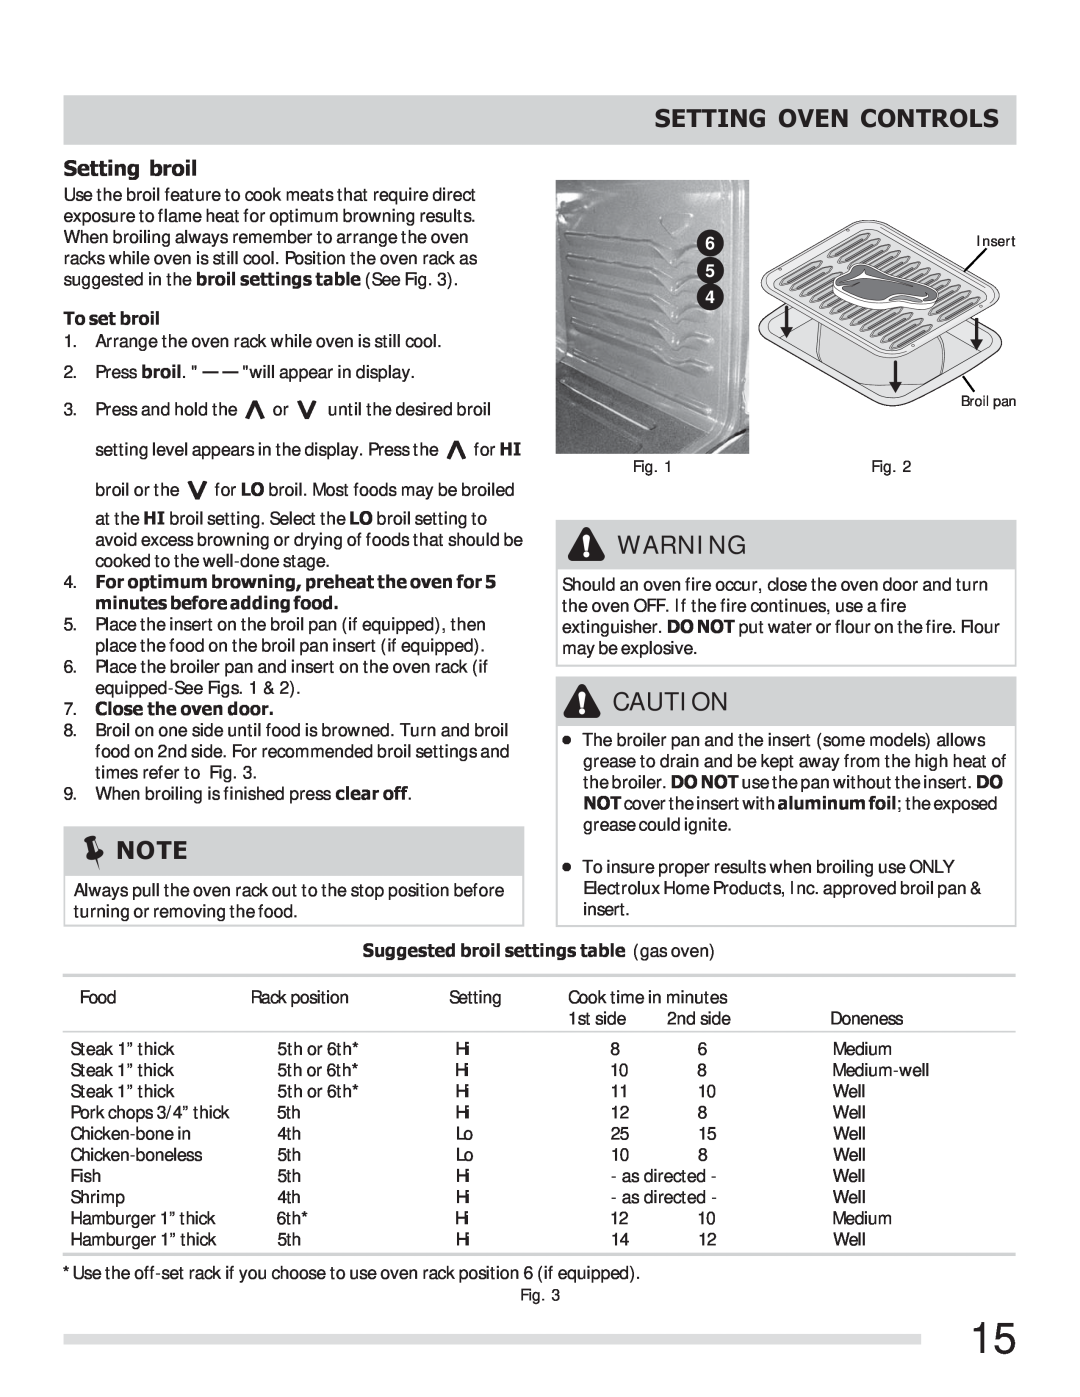 Frigidaire FFGF3023LQ, 316901213 Setting broil, To set broil, Close the oven door, Suggested broil settings table gas oven 